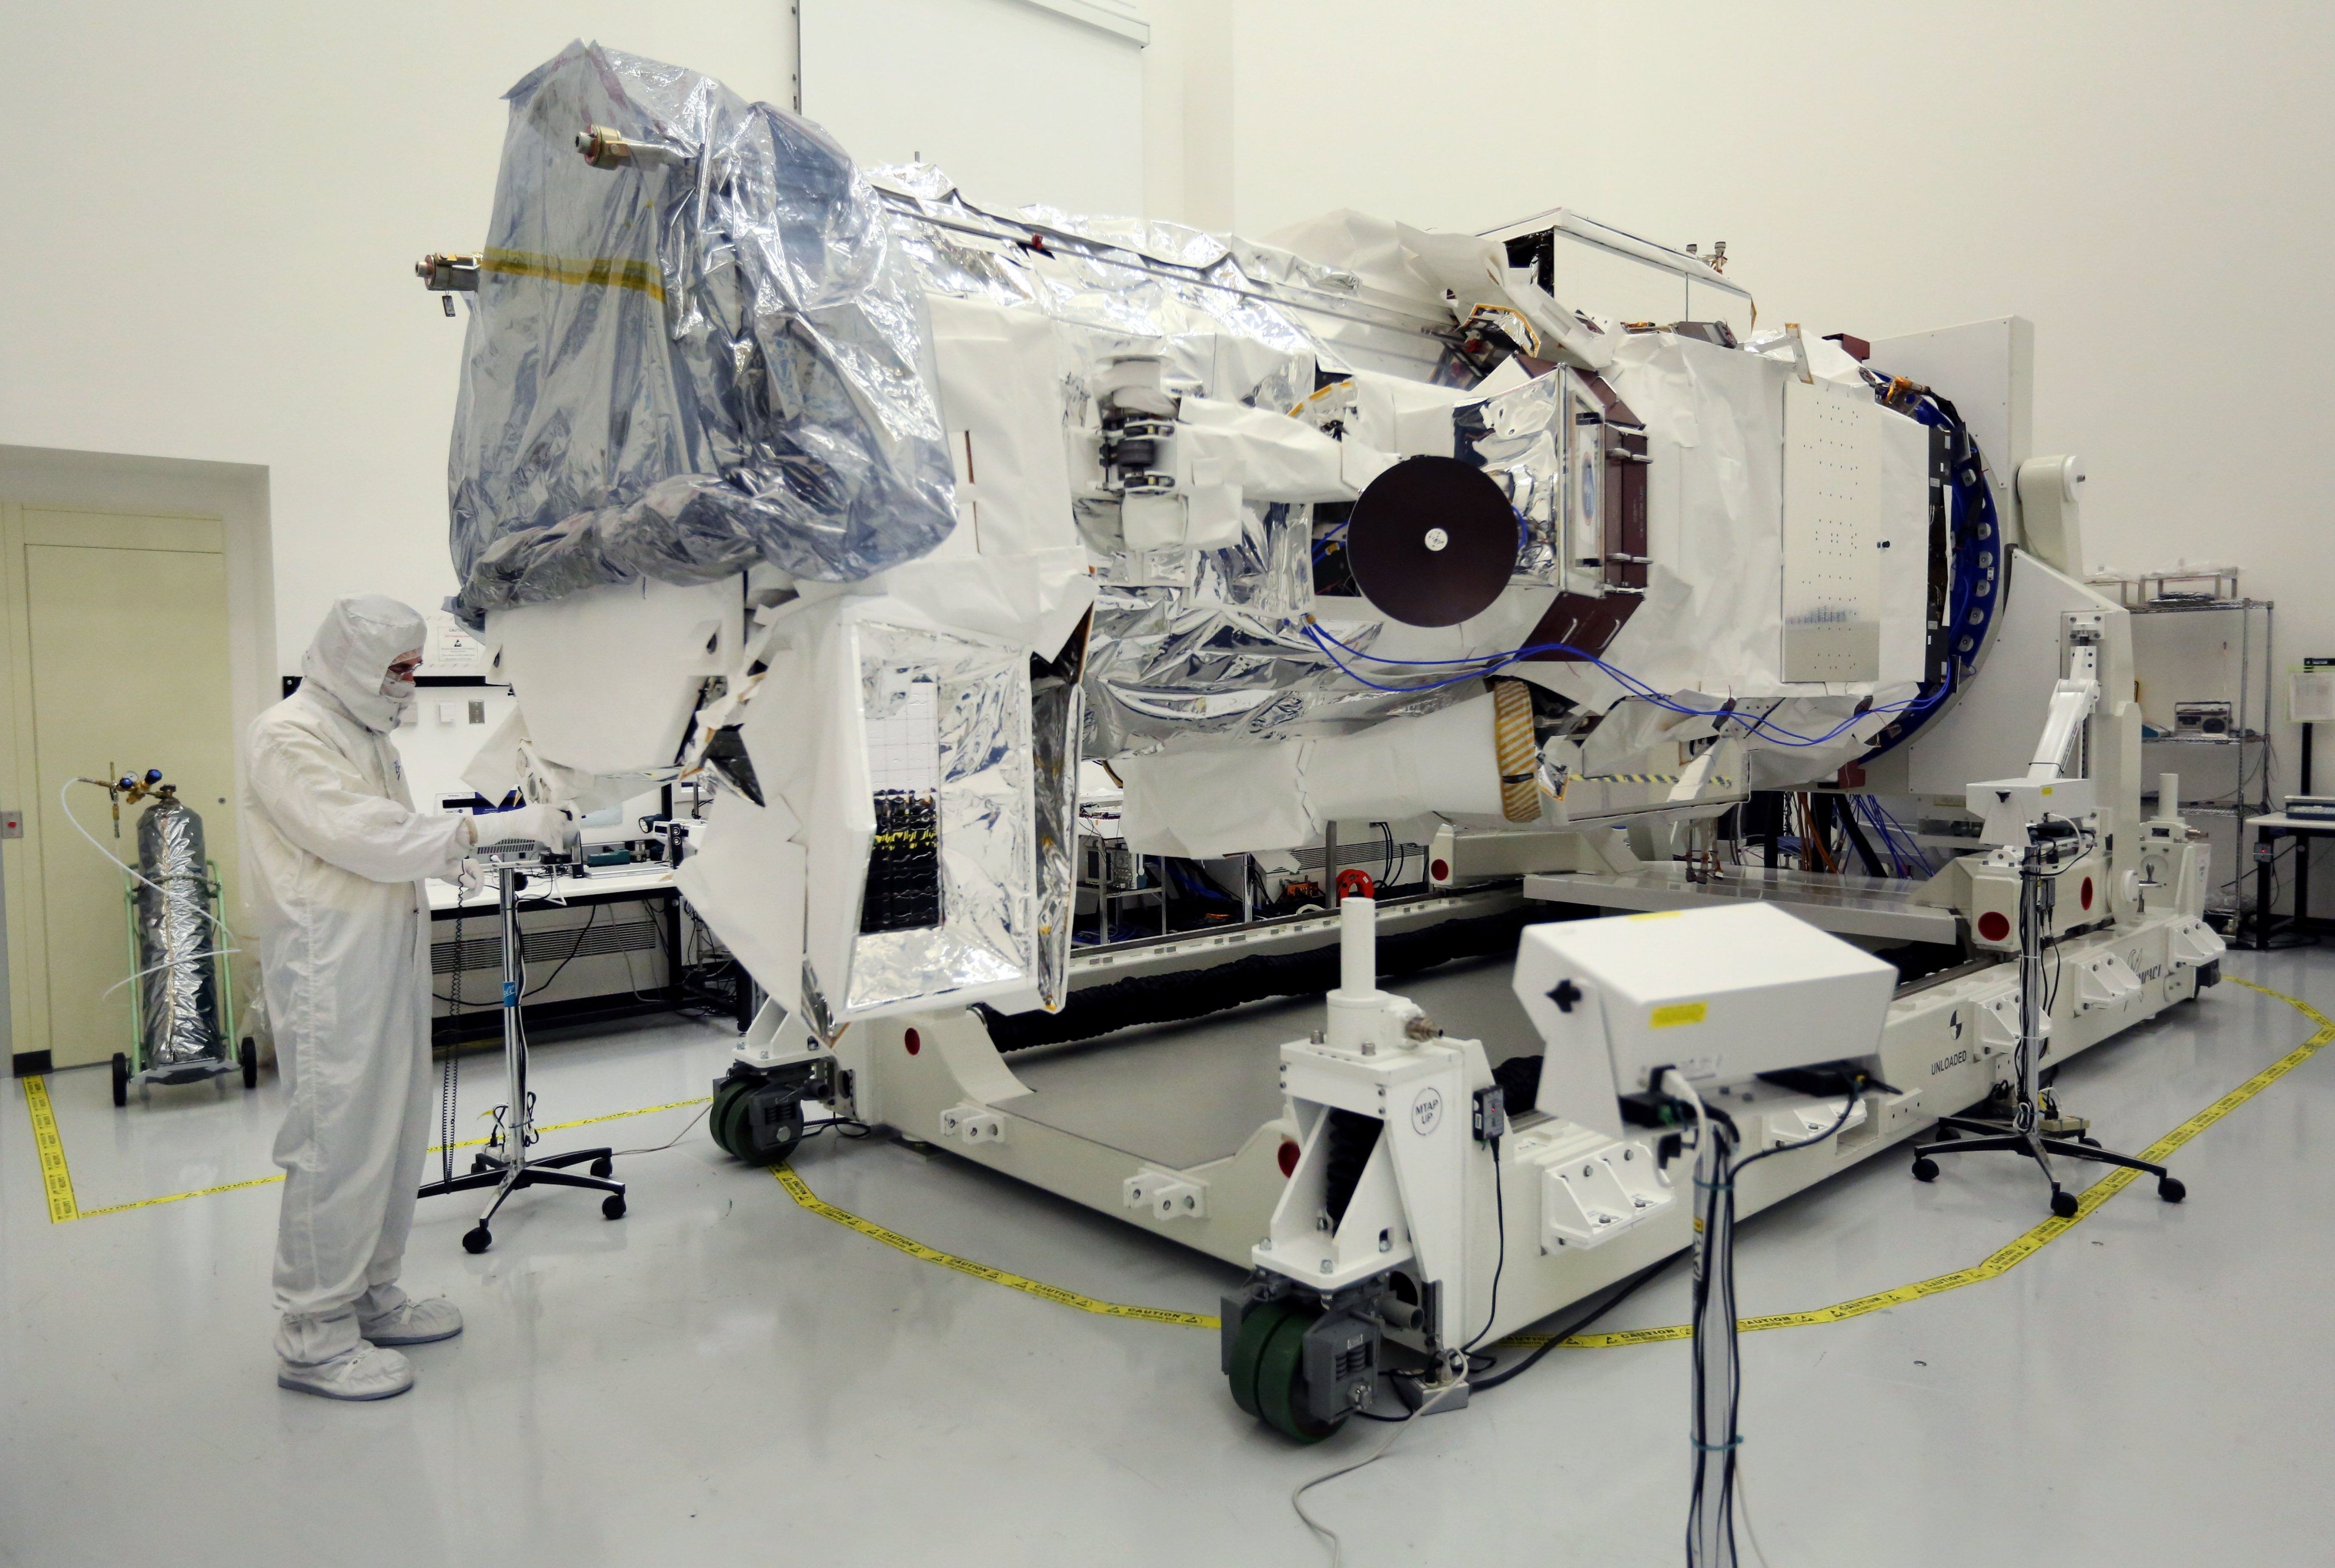 A technician wearing a clean suit runs tests on WorldView-3, a new high-resolution imaging satellite owned by commercial satellite company DigitalGlobe, at Ball Aerospace in Boulder, Colo., on Tuesday, May 13, 2014. 